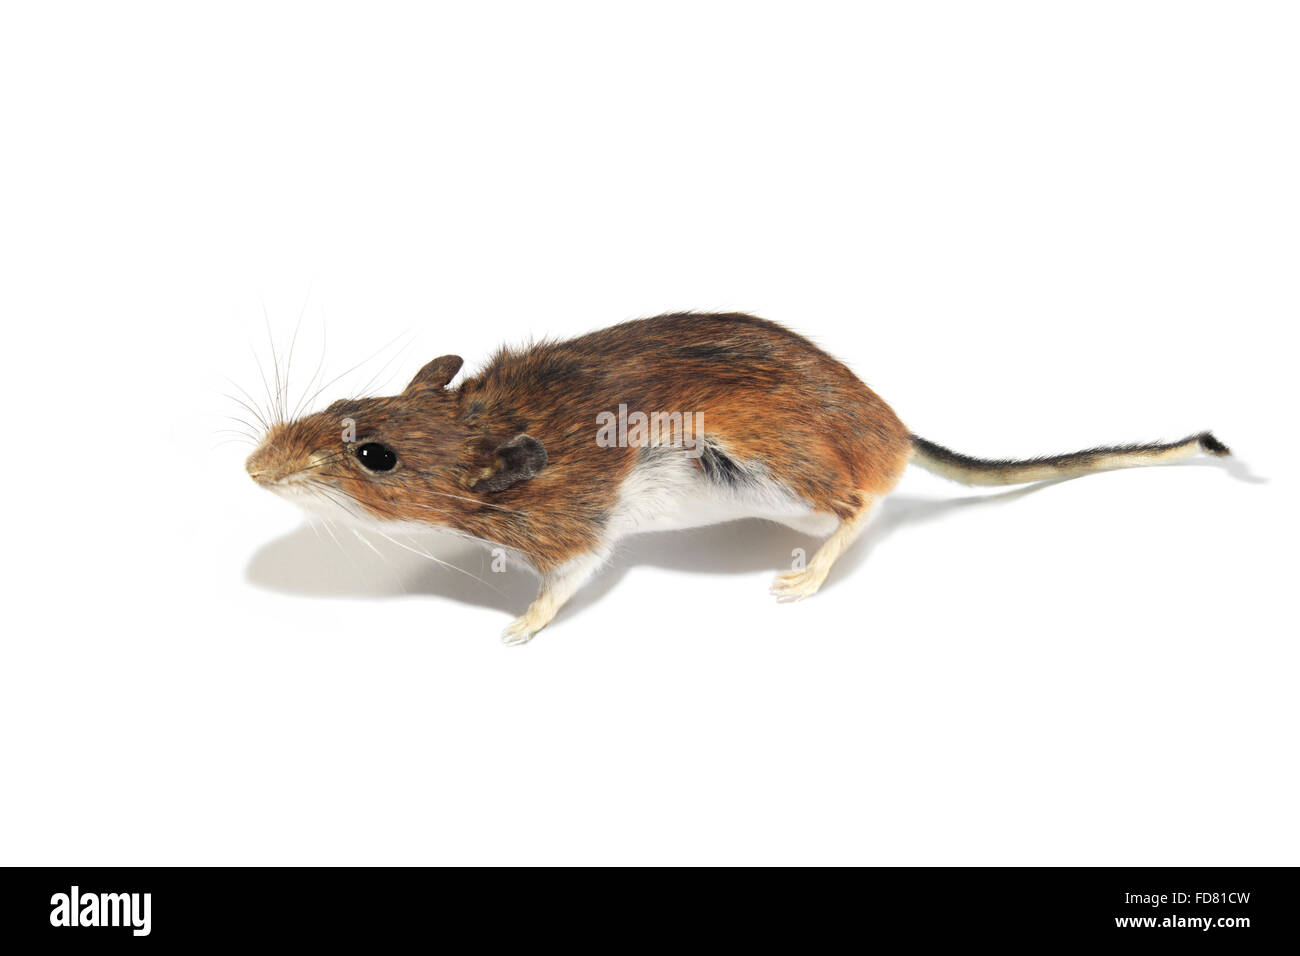 Studio portrait of a Mouse on White Background Stock Photo